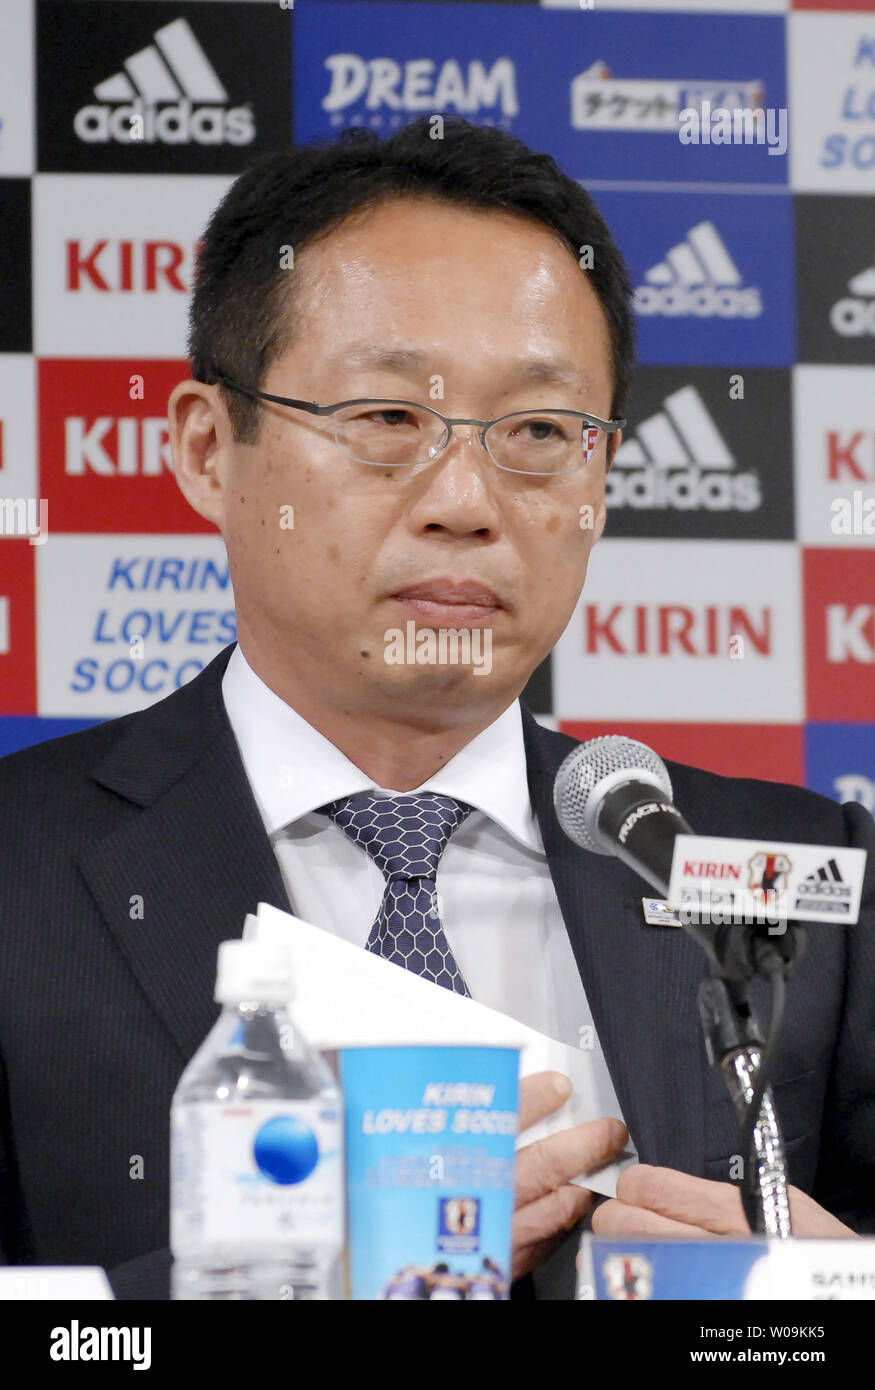 Takeshi Okada Head Coach Of Japan S Soccer National Team Announces 23 Member Squad For World Cup In South Africa During A Press Conference In Tokyo Japan On May 10 2010 Upi Keizo Mori